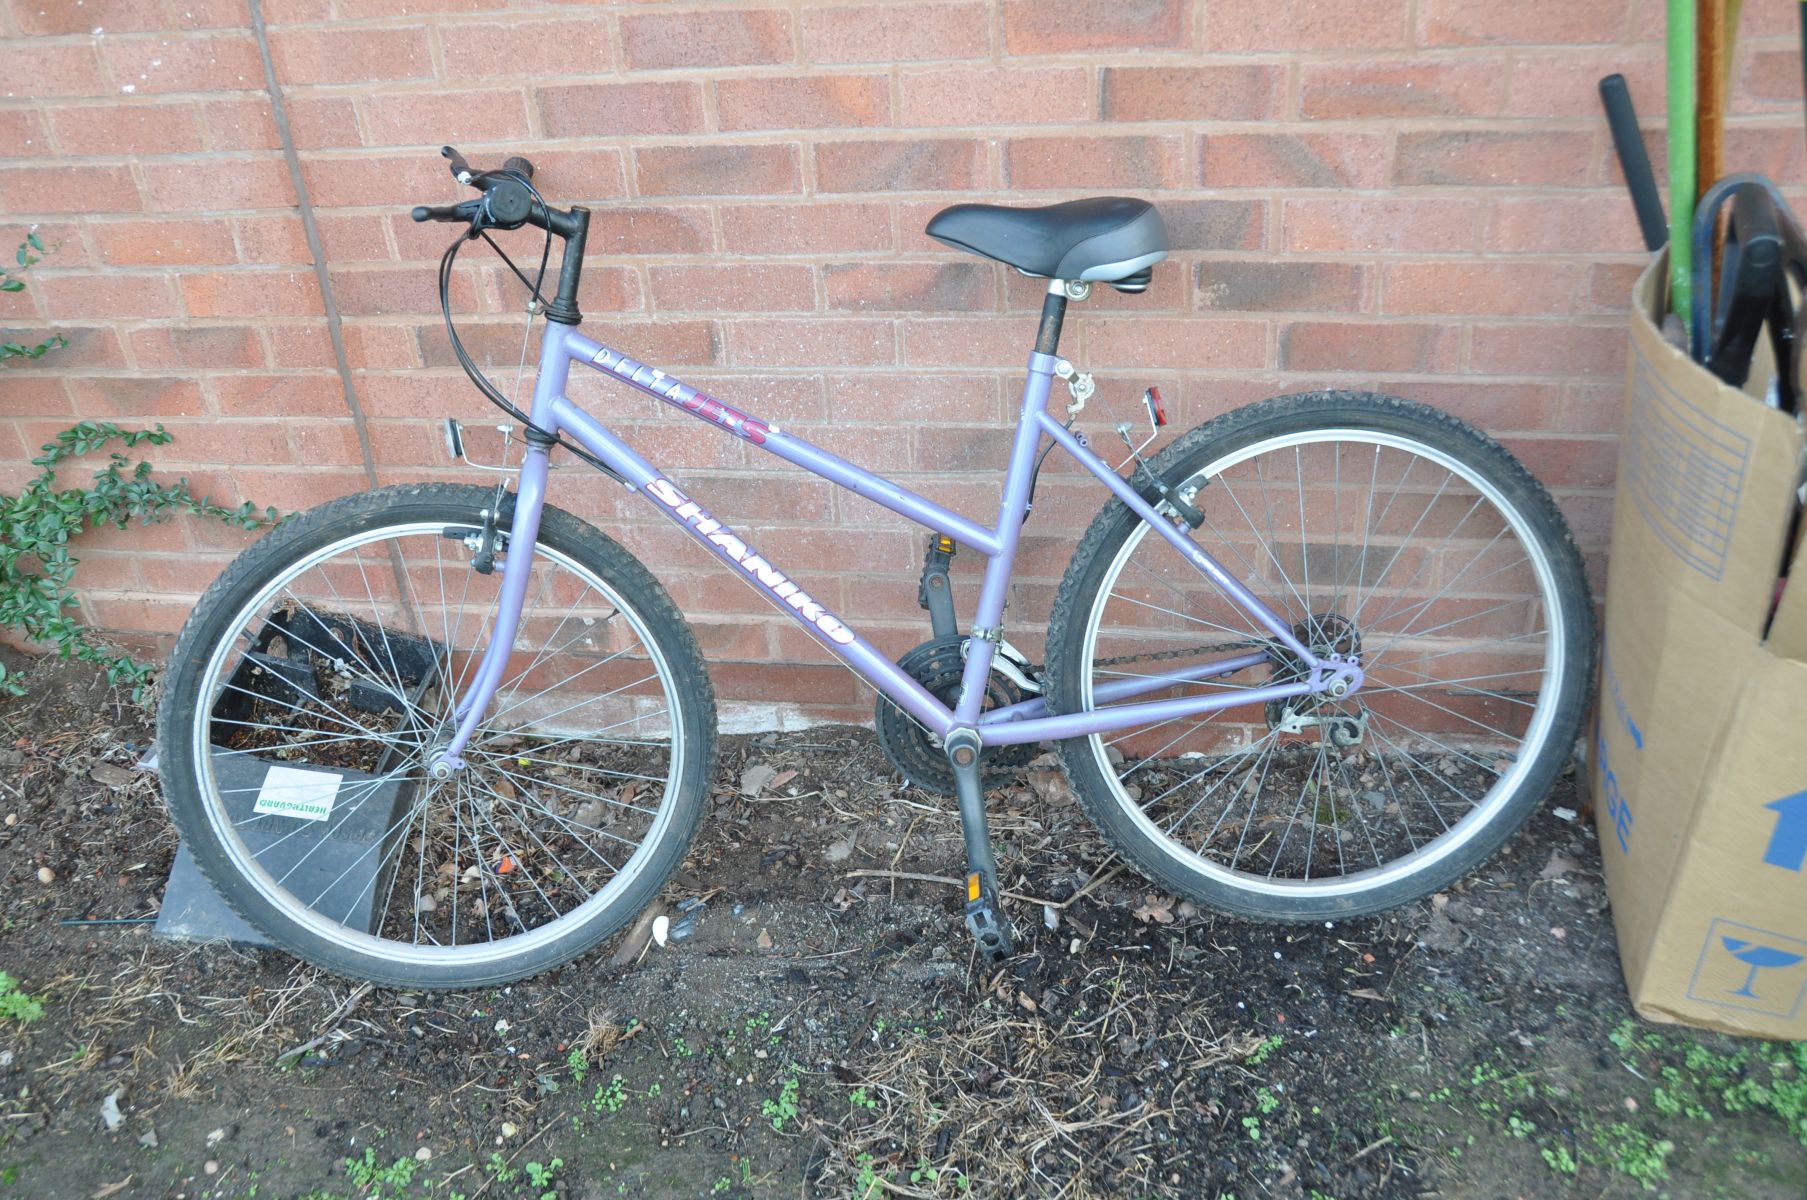 A SHANIKO DELTA JETS LADIES MOUNTAIN BIKE with 15 speed twist grip Shimano gears and a 18in frame